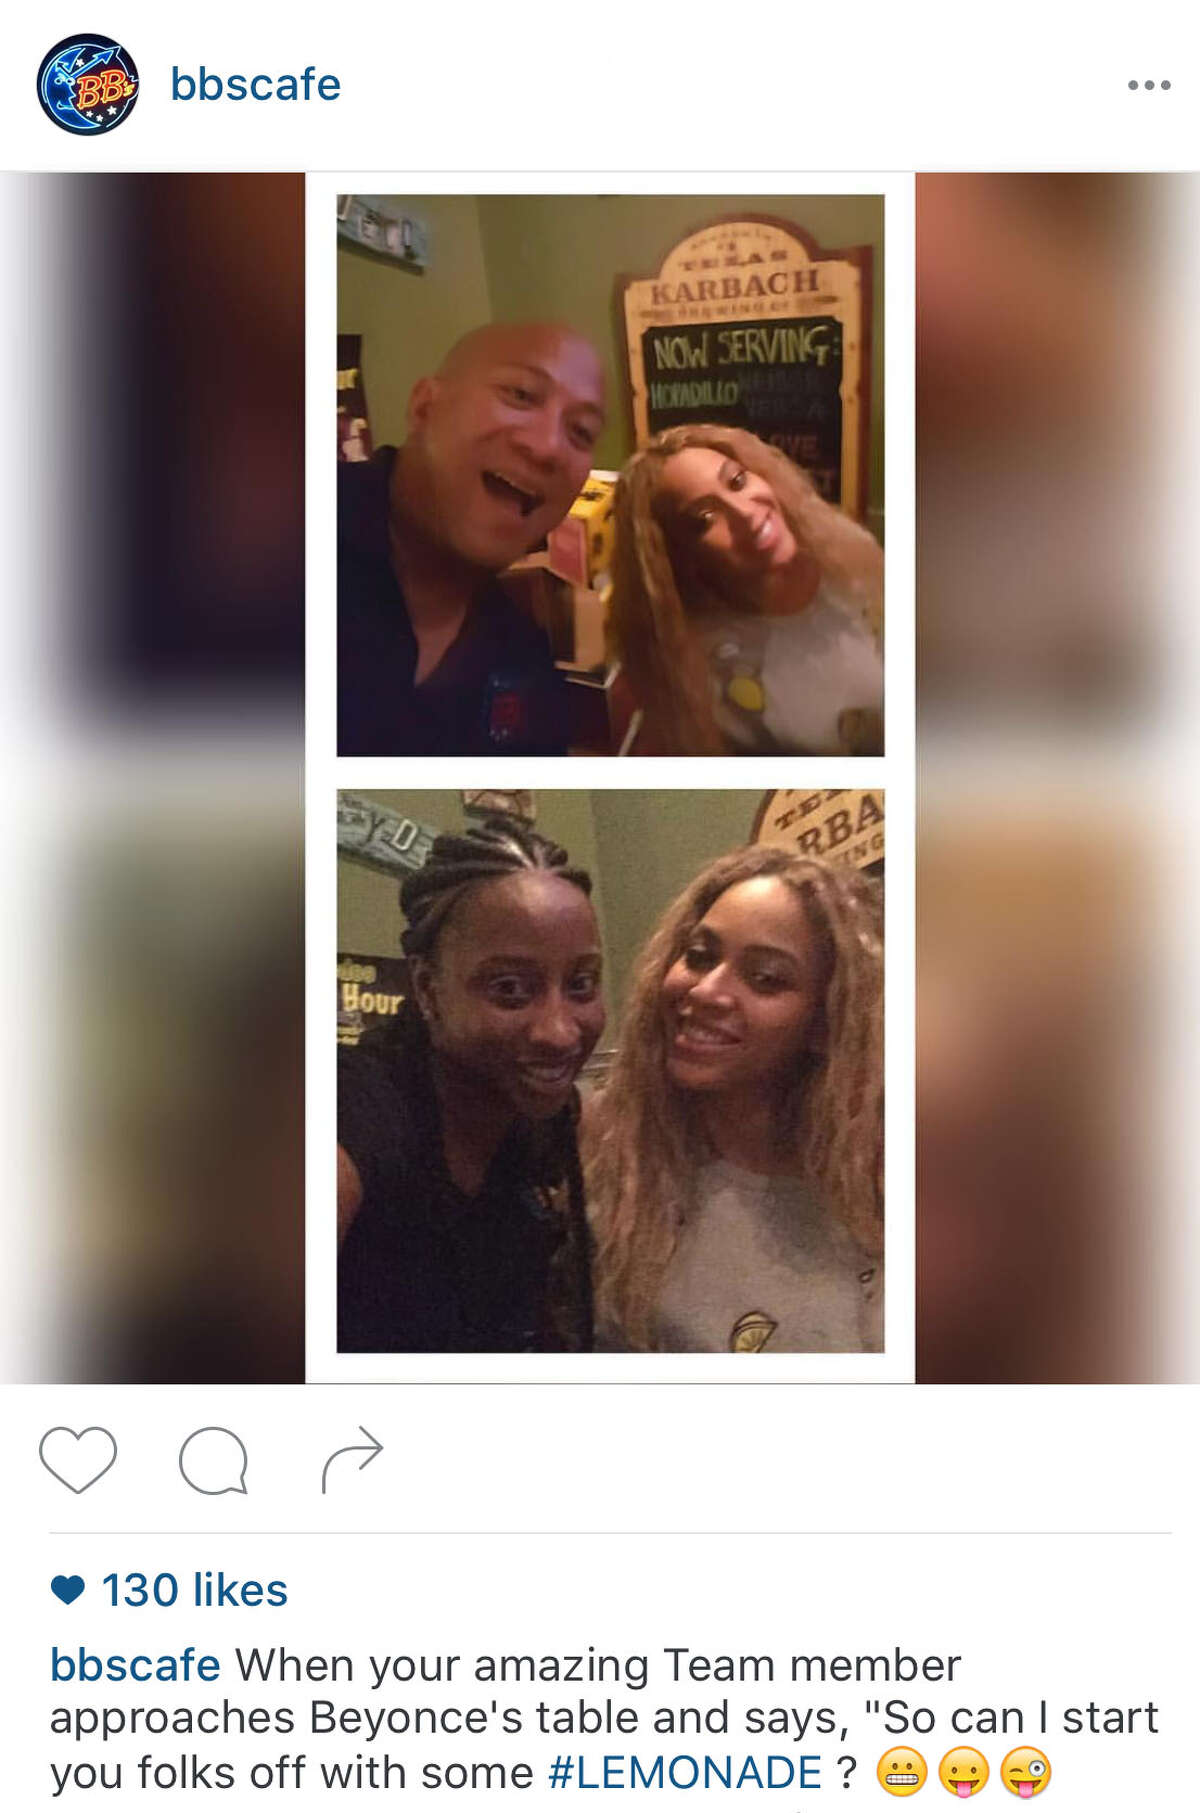 Beyoncé visited BB's Cafe in Montrose Saturday night.